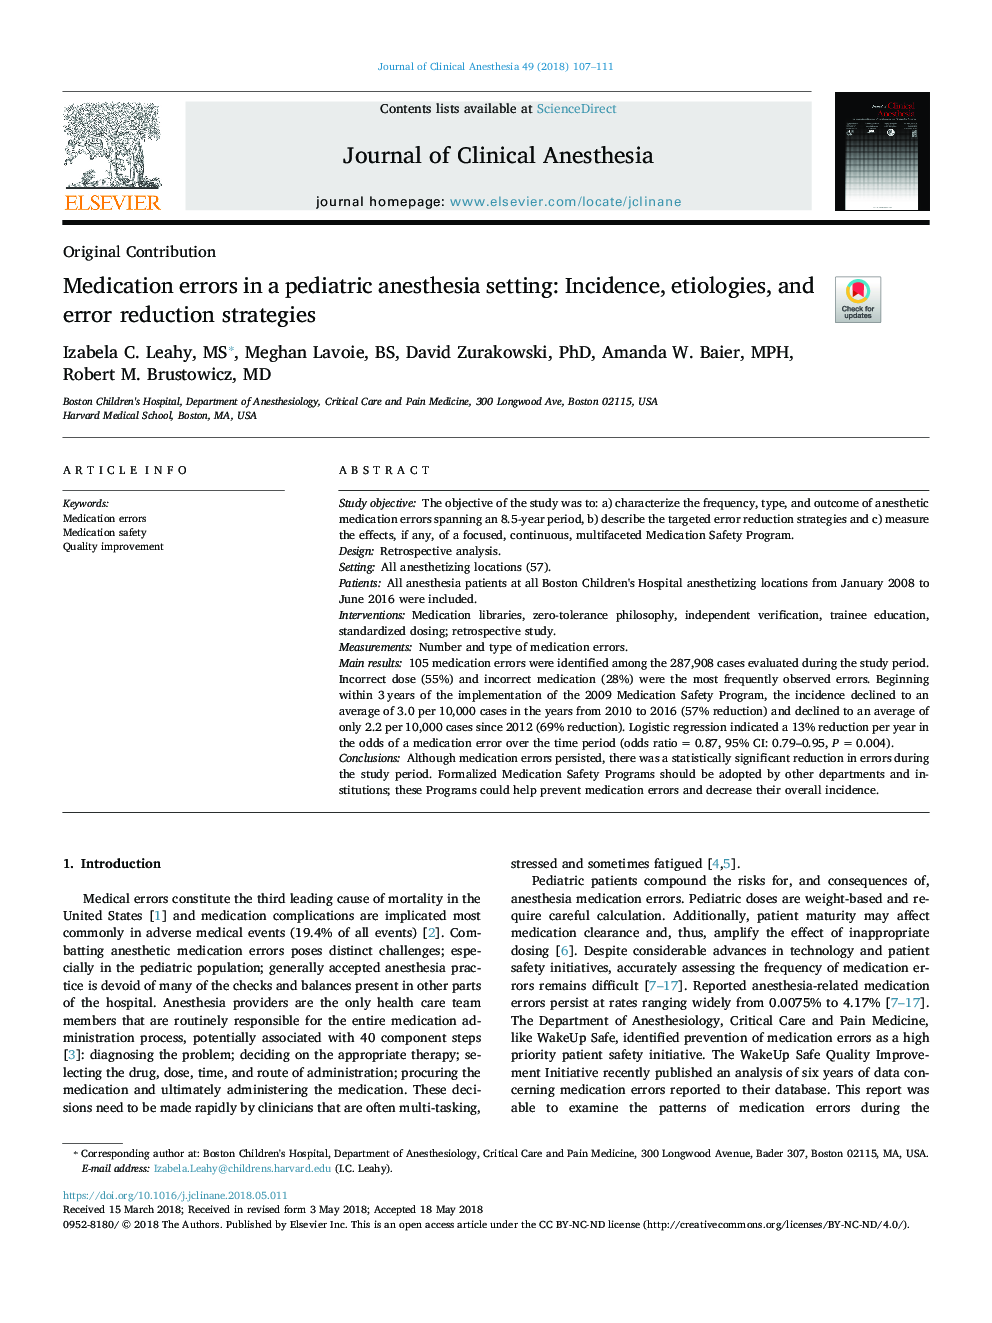 Medication errors in a pediatric anesthesia setting: Incidence, etiologies, and error reduction strategies